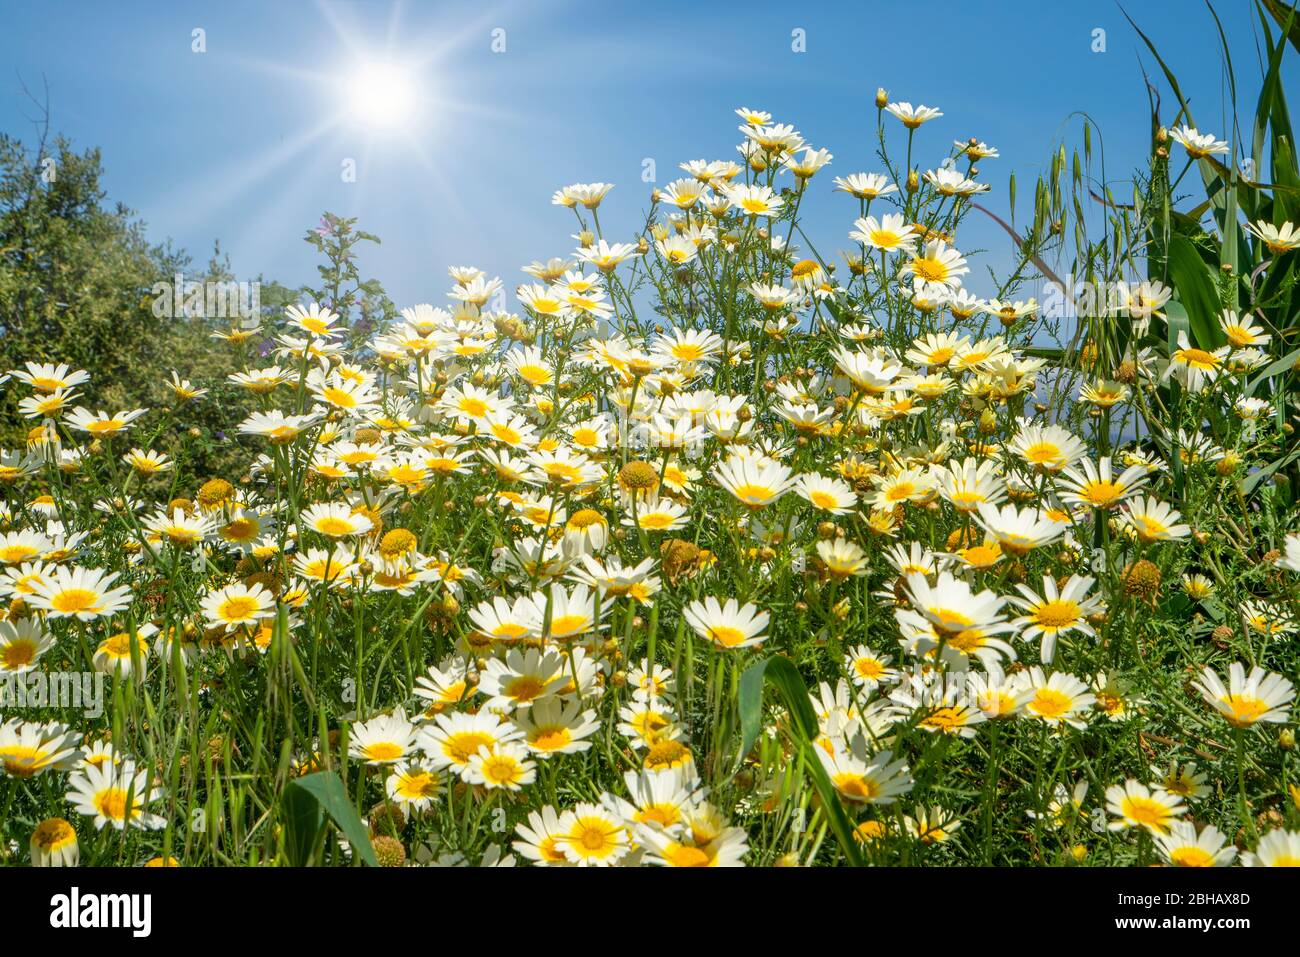 Field of daisy flowers with sun. Stock Photo